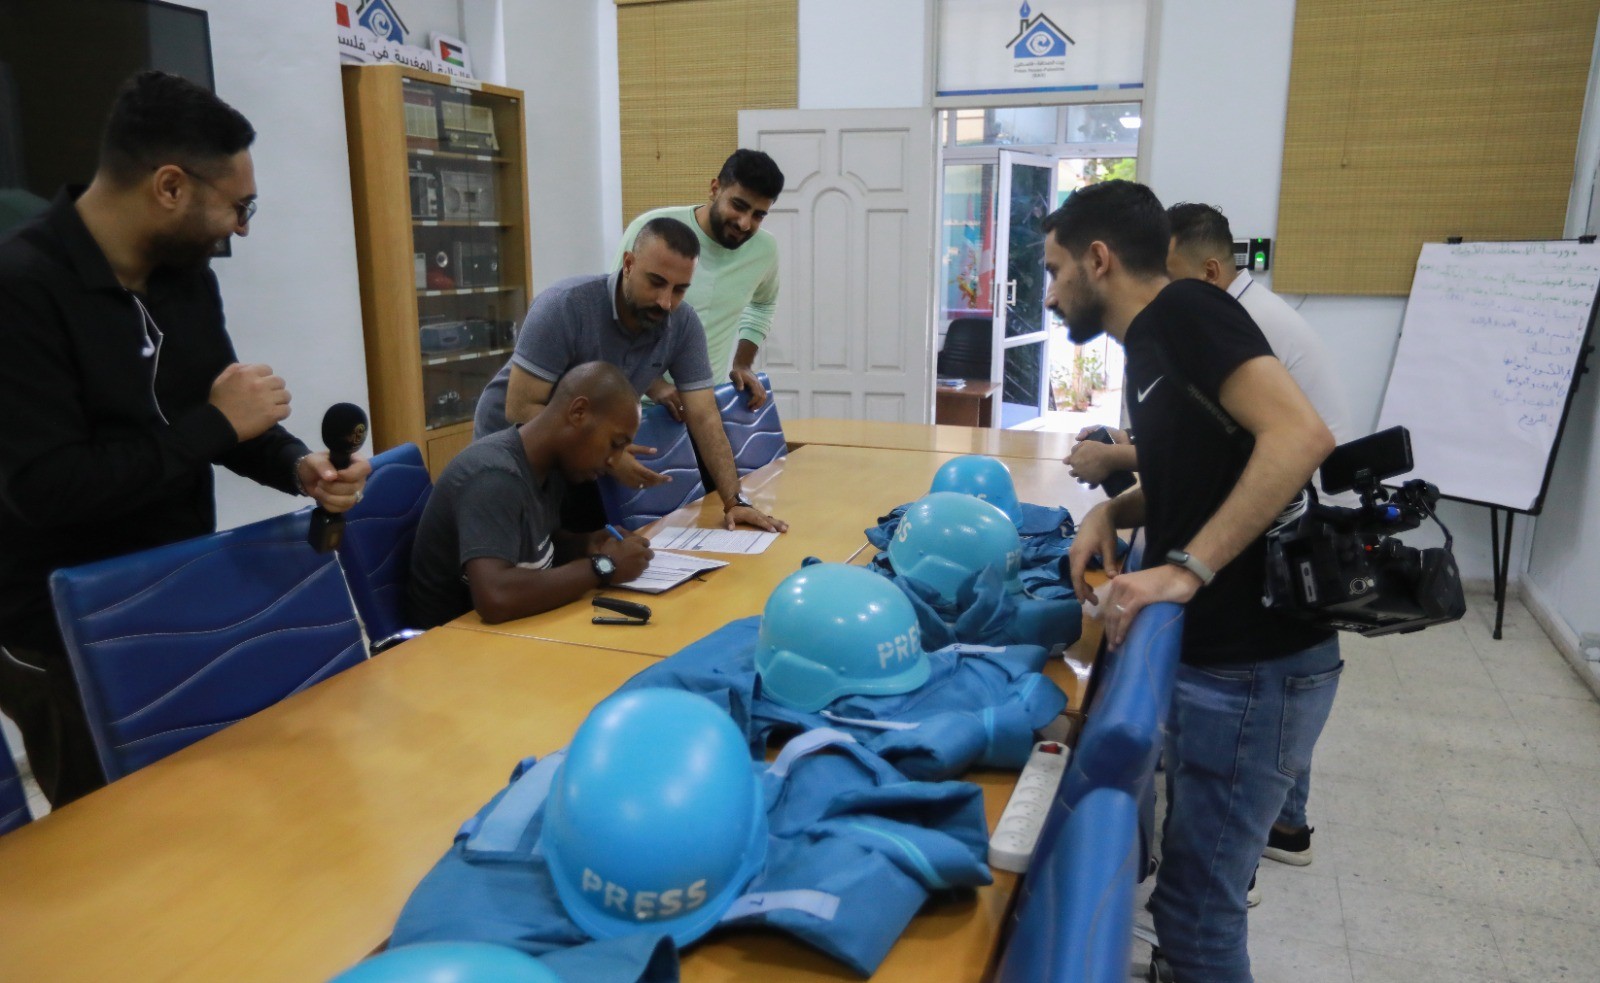 Press House distributes  safety equipment to dozens of journalists for media coverage during the war